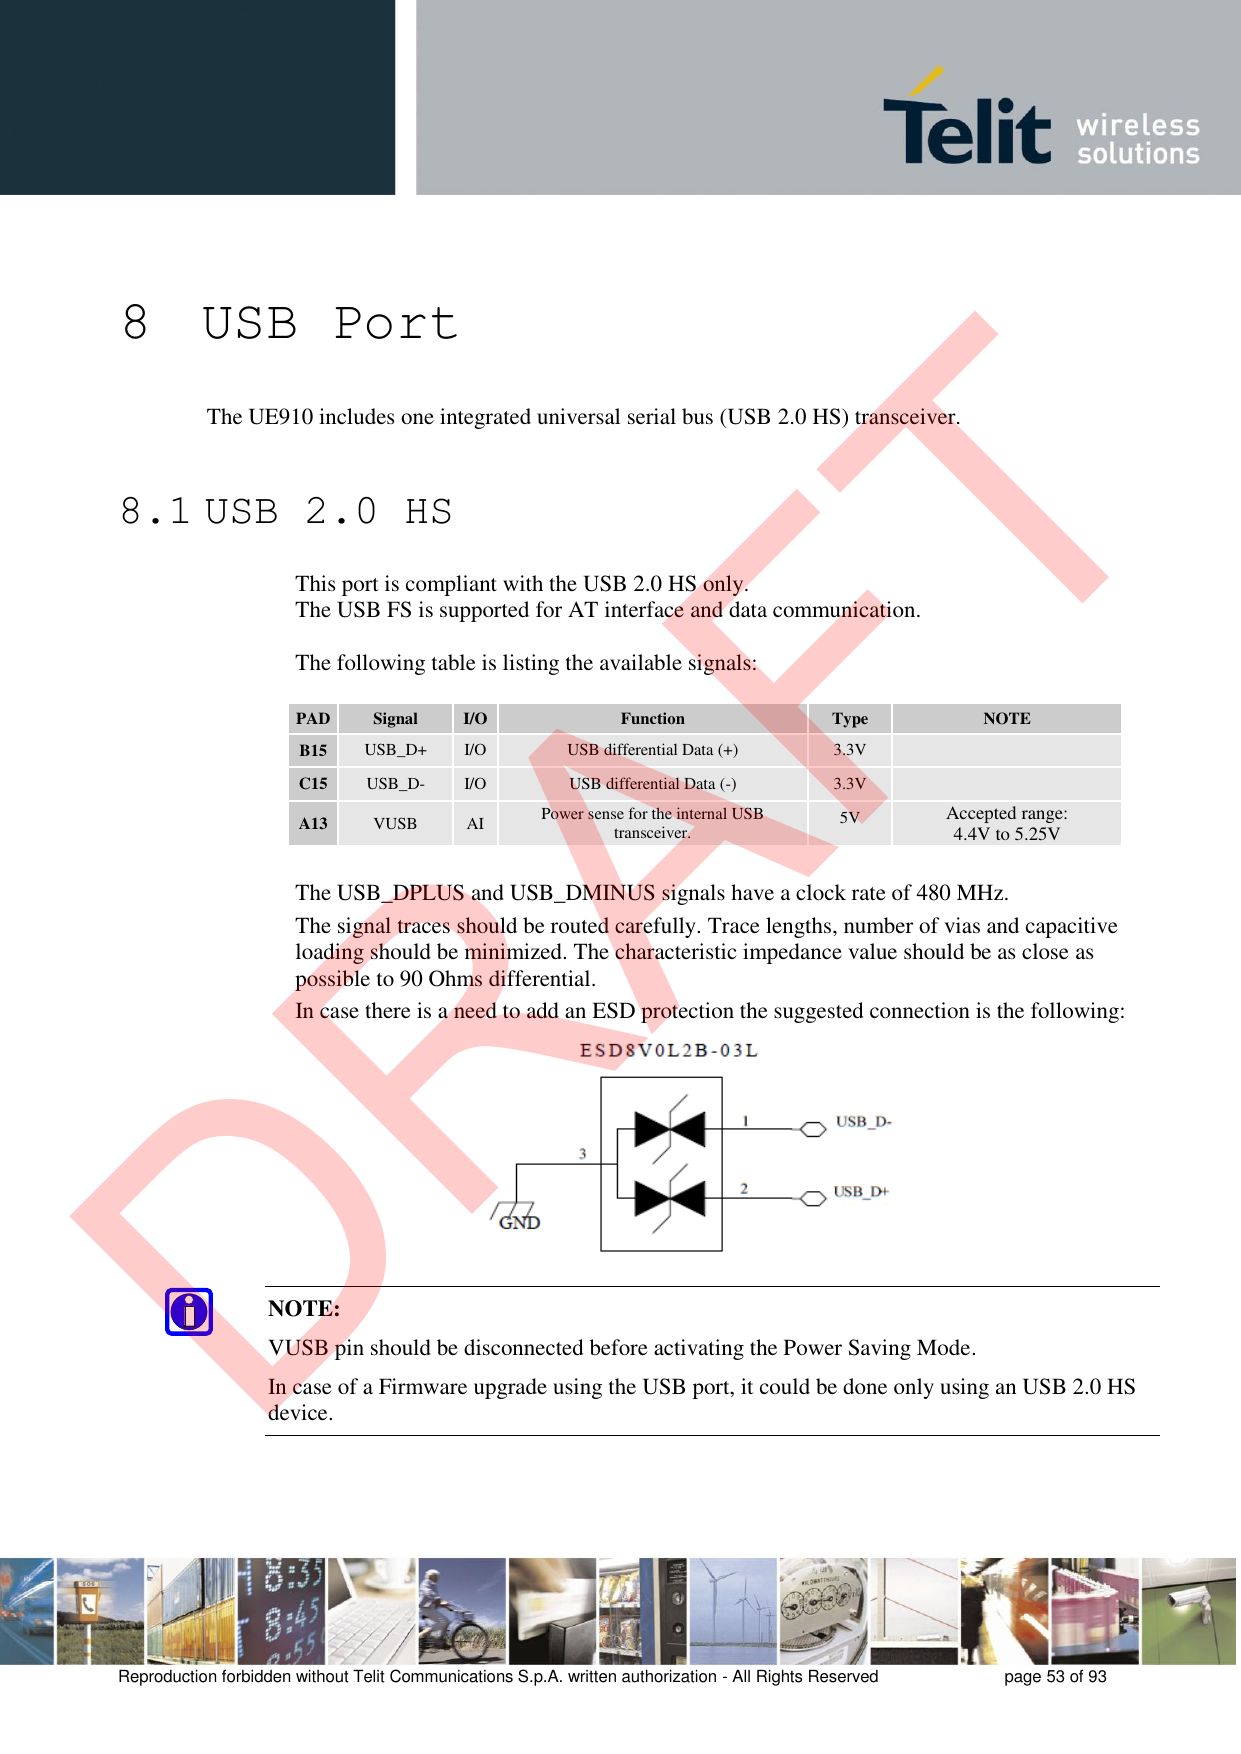 Reproduction forbidden without Telit Communications S.p.A. written authorization - All Rights Reserved  page 53 of 93 8 USB Port The UE910 includes one integrated universal serial bus (USB 2.0 HS) transceiver. 8.1 USB 2.0 HS This port is compliant with the USB 2.0 HS only. The USB FS is supported for AT interface and data communication. The following table is listing the available signals: PAD Signal I/O Function Type NOTE B15 USB_D+ I/O USB differential Data (+) 3.3V C15 USB_D- I/O USB differential Data (-) 3.3V A13 VUSB AI Power sense for the internal USB transceiver. 5V Accepted range: 4.4V to 5.25V The USB_DPLUS and USB_DMINUS signals have a clock rate of 480 MHz. The signal traces should be routed carefully. Trace lengths, number of vias and capacitive loading should be minimized. The characteristic impedance value should be as close as possible to 90 Ohms differential. In case there is a need to add an ESD protection the suggested connection is the following: NOTE: VUSB pin should be disconnected before activating the Power Saving Mode. In case of a Firmware upgrade using the USB port, it could be done only using an USB 2.0 HS device. DRAFT